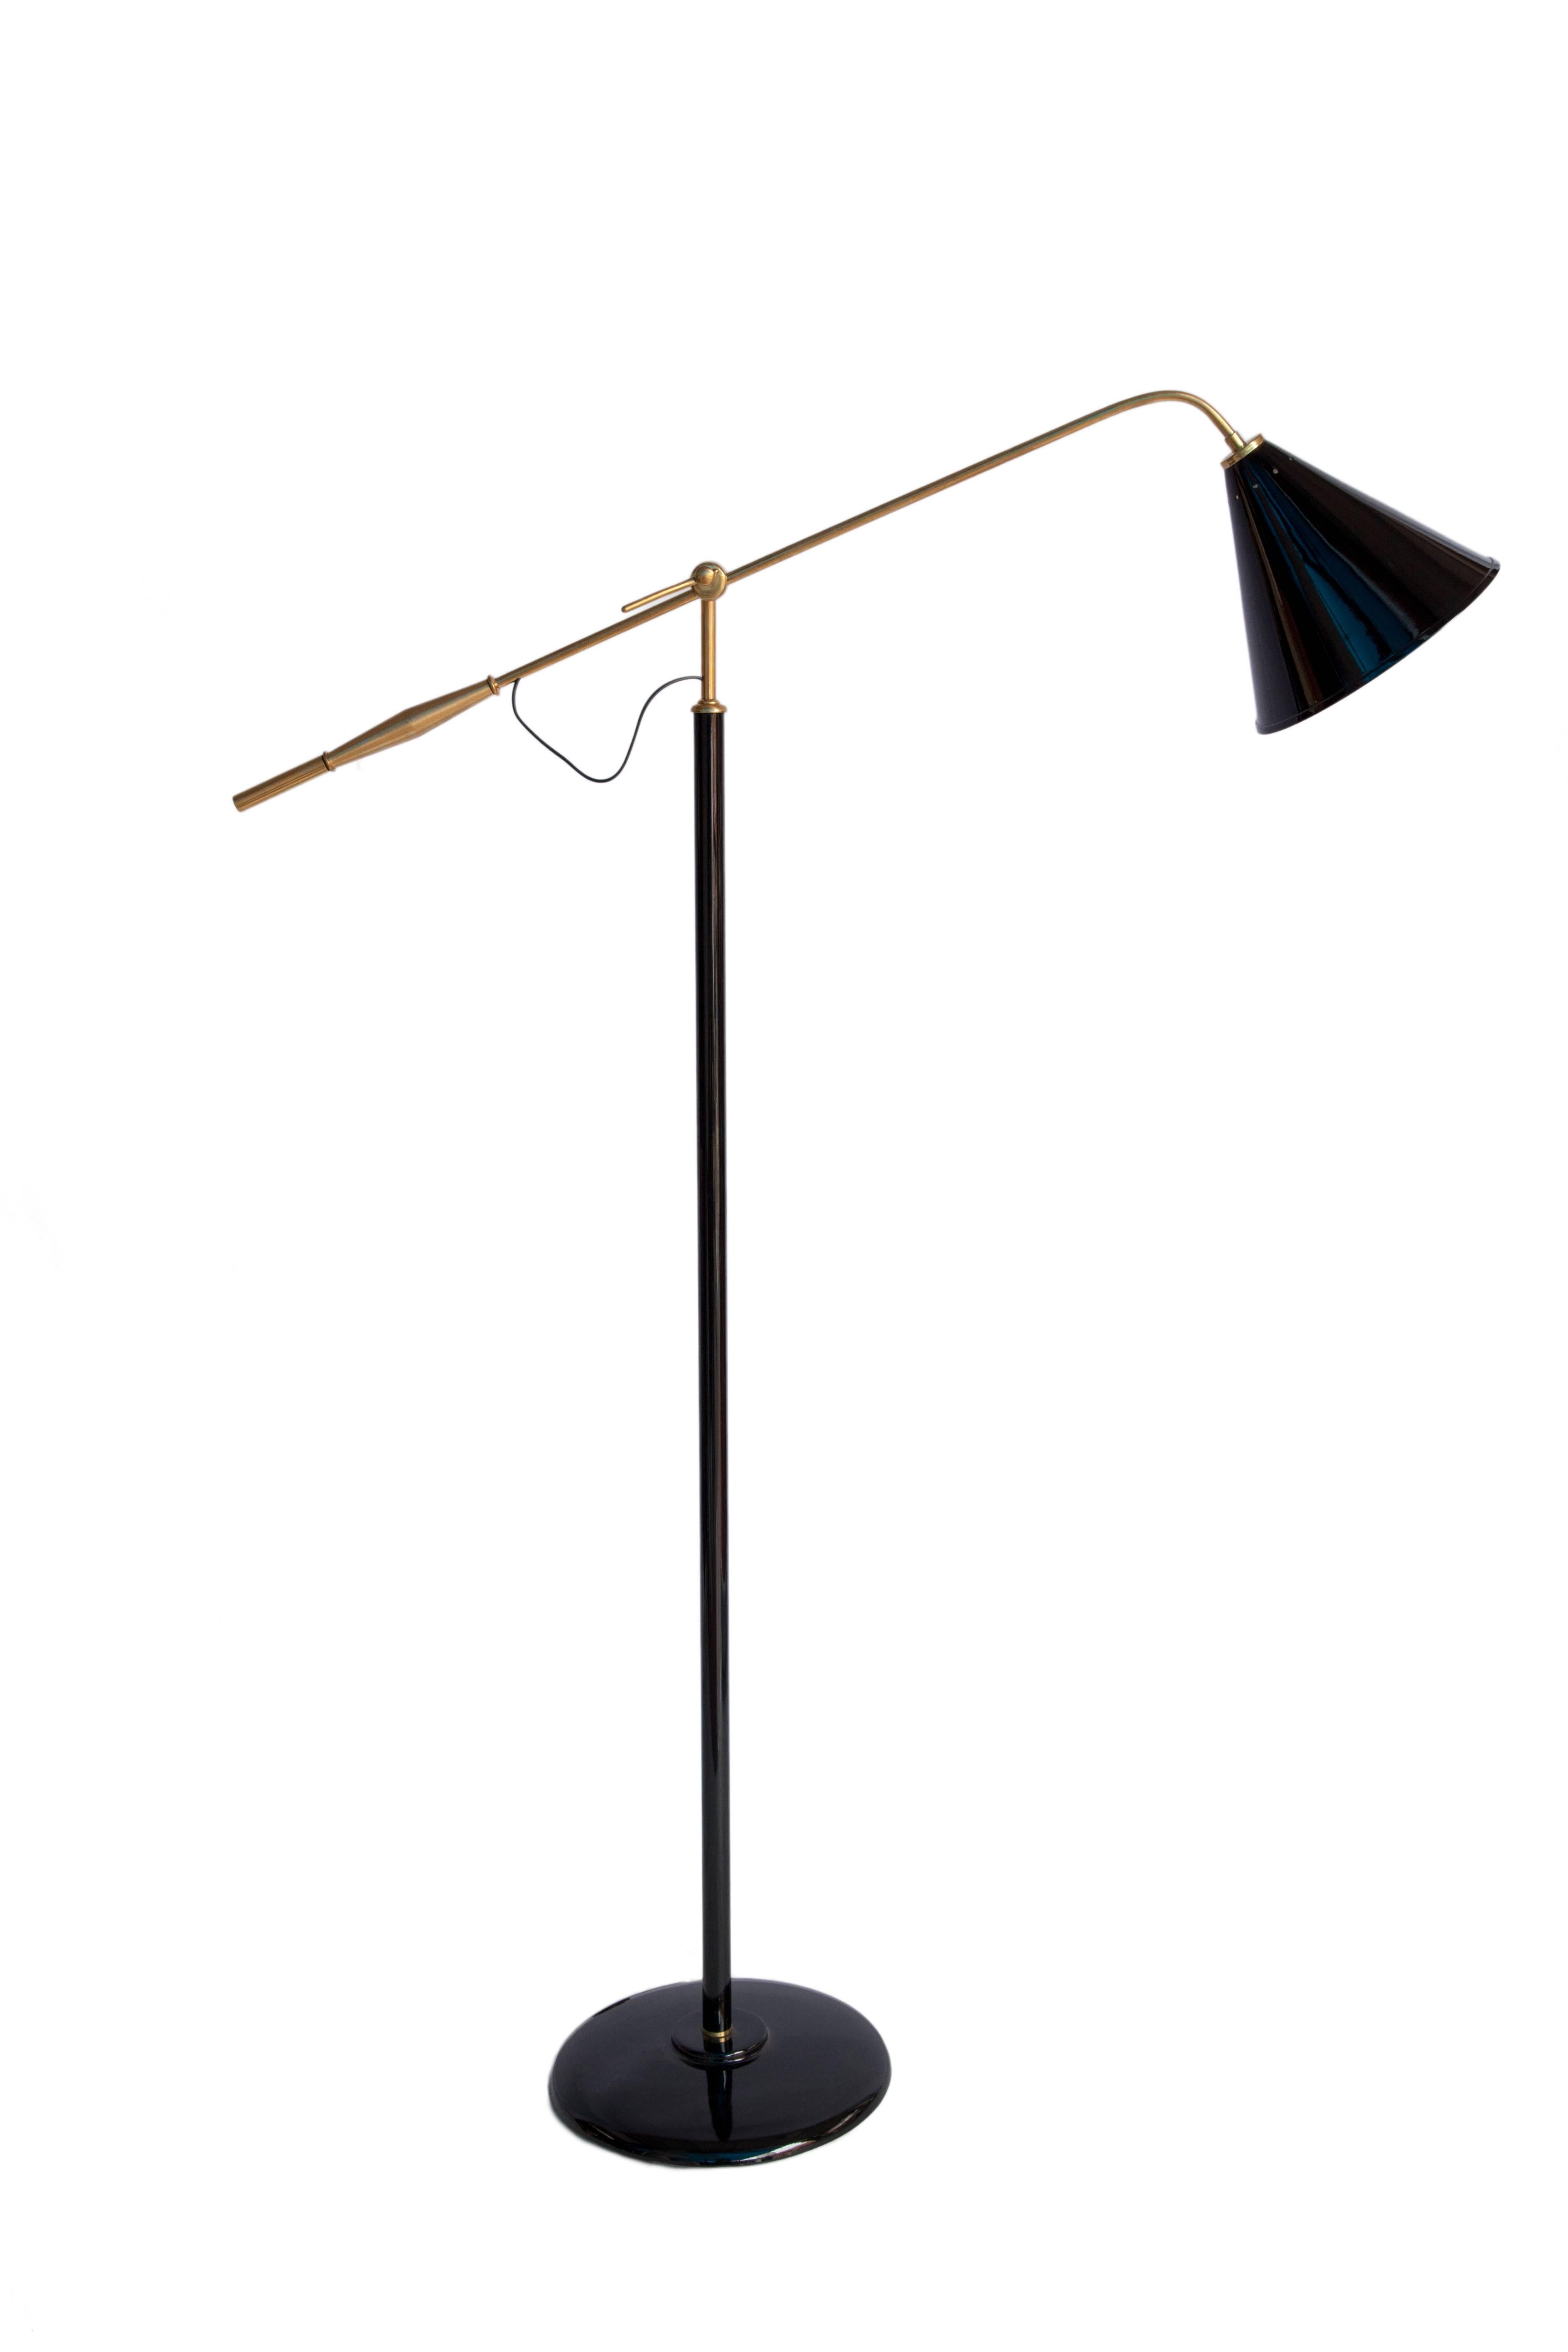 A midcentury floor lamp in brass and black painted iron from Brazil, circa 1950s. This floor lamp has a modernistic conical shade and articulating arm. It is in good vintage condition and has wear consistent with age and use. 111459.